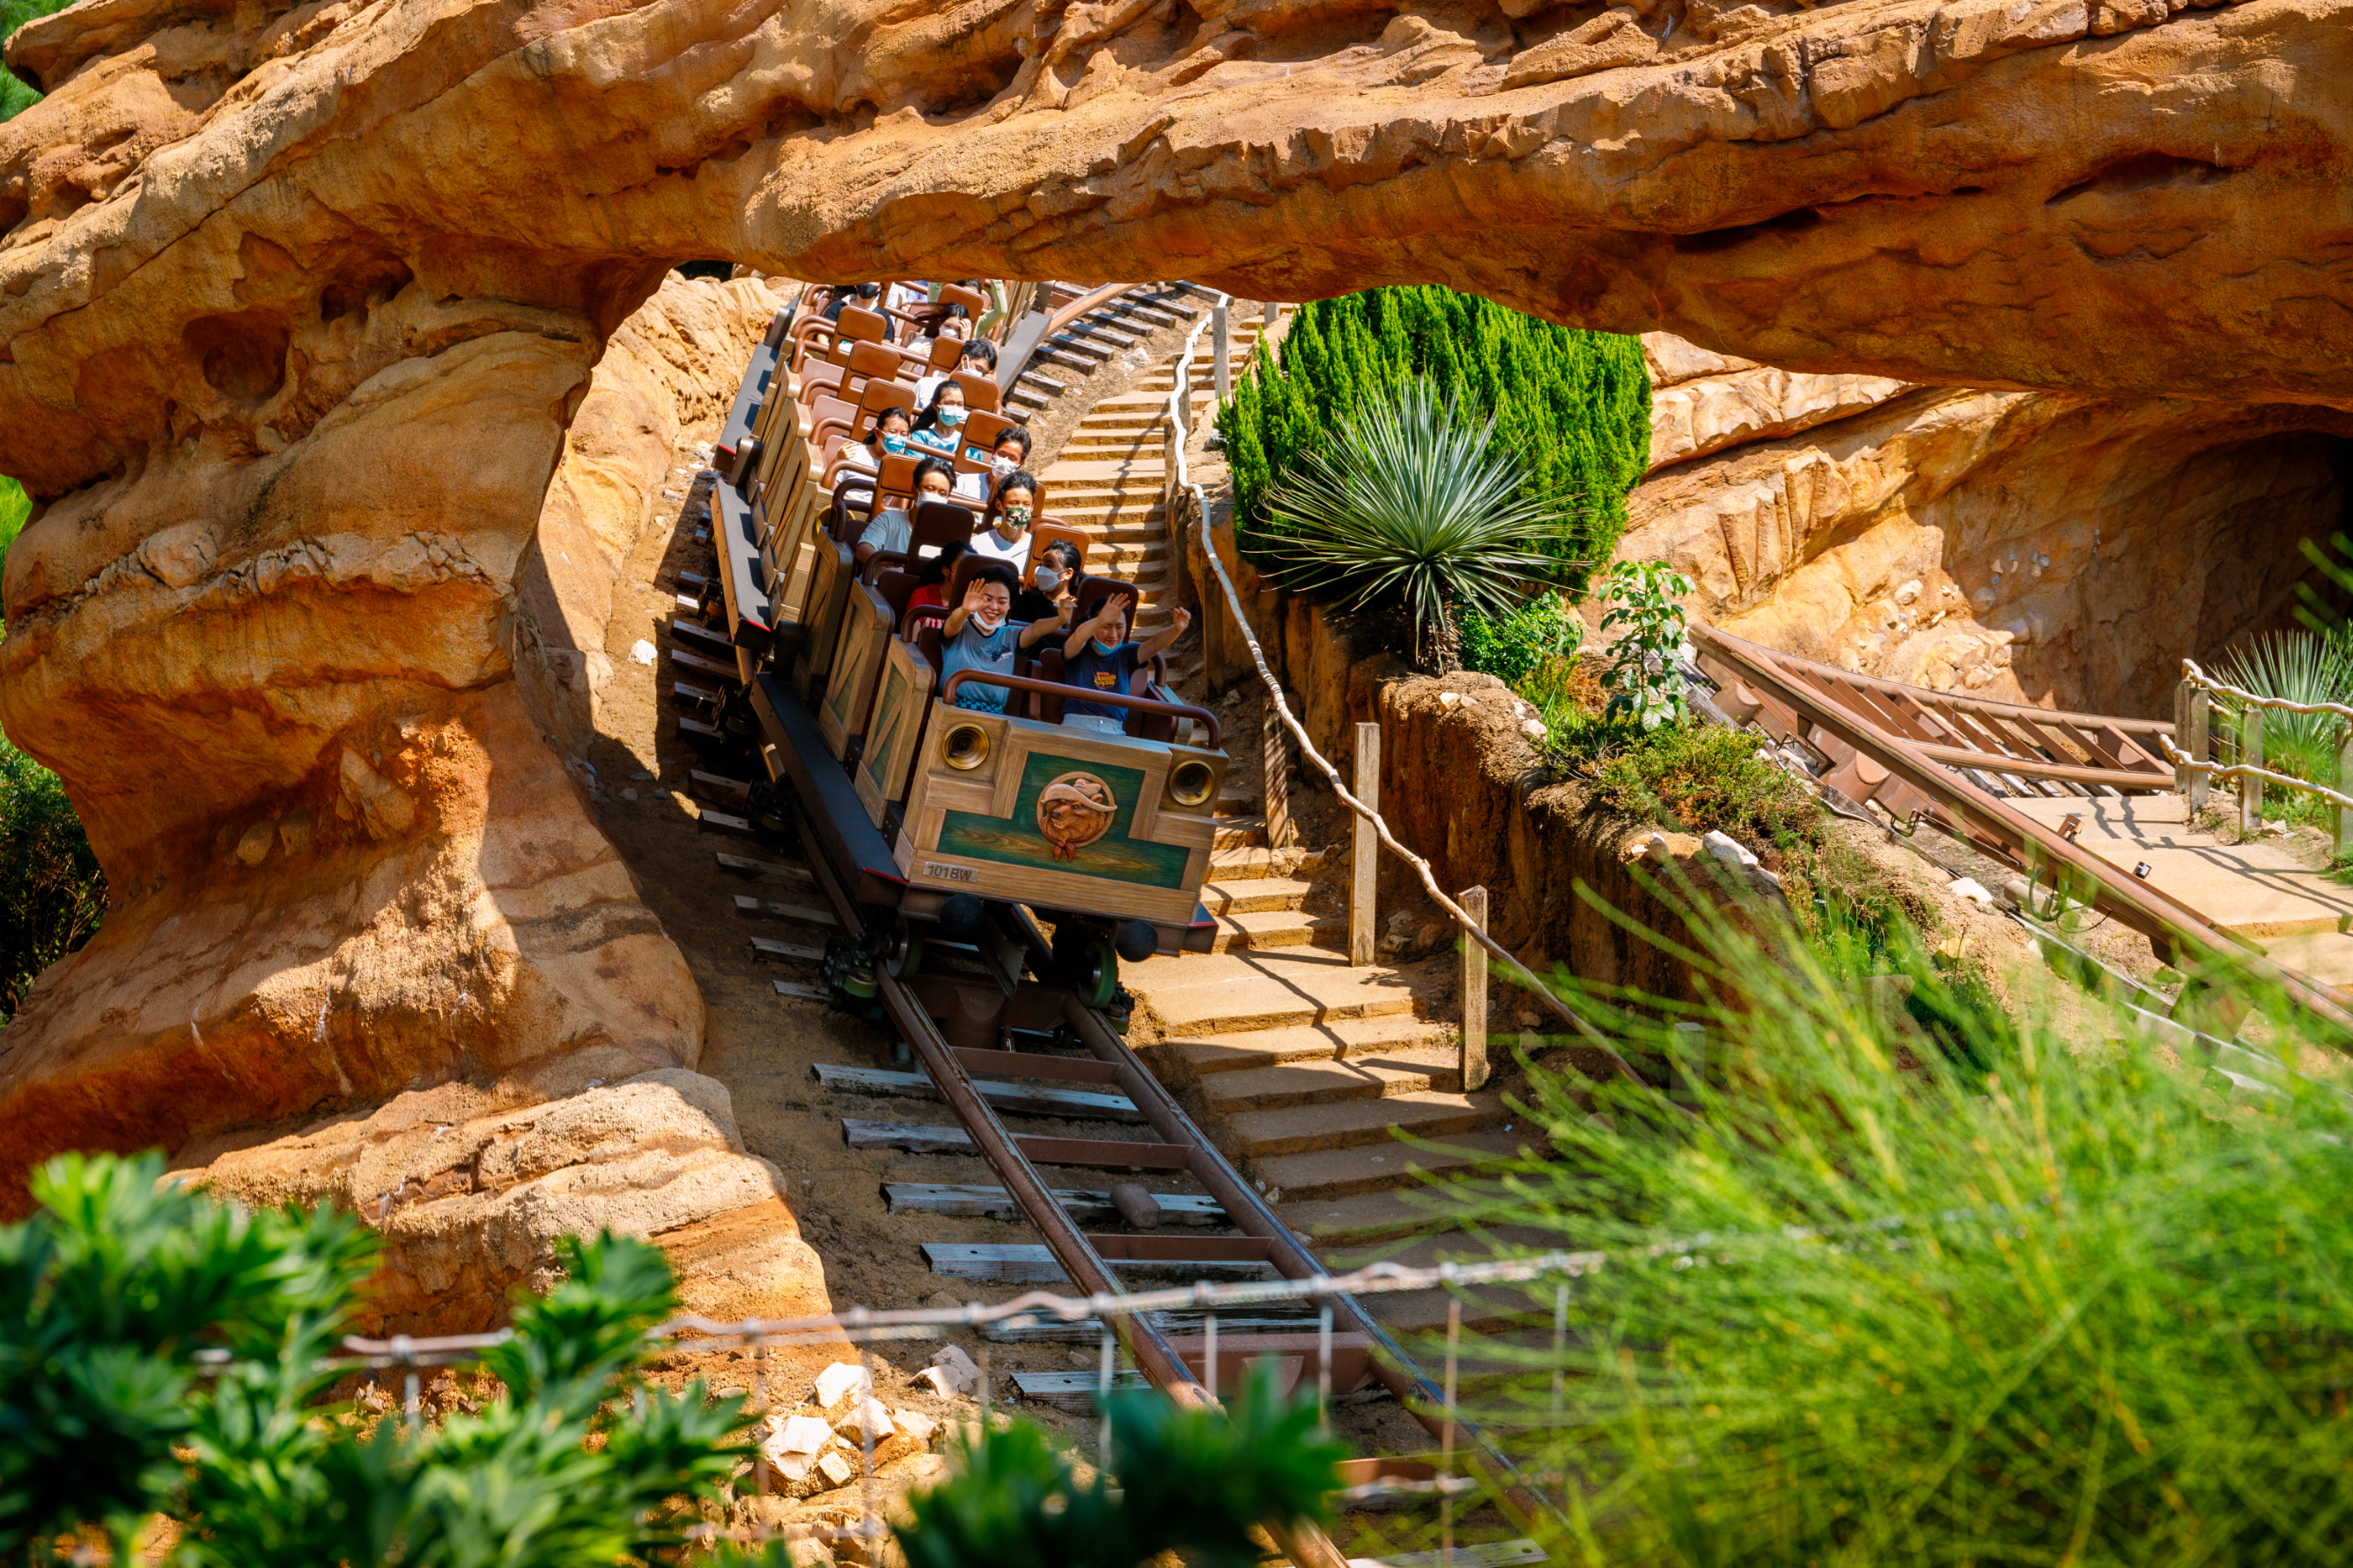 Roller coaster with passengers ascending a track, surrounded by rocky landscape